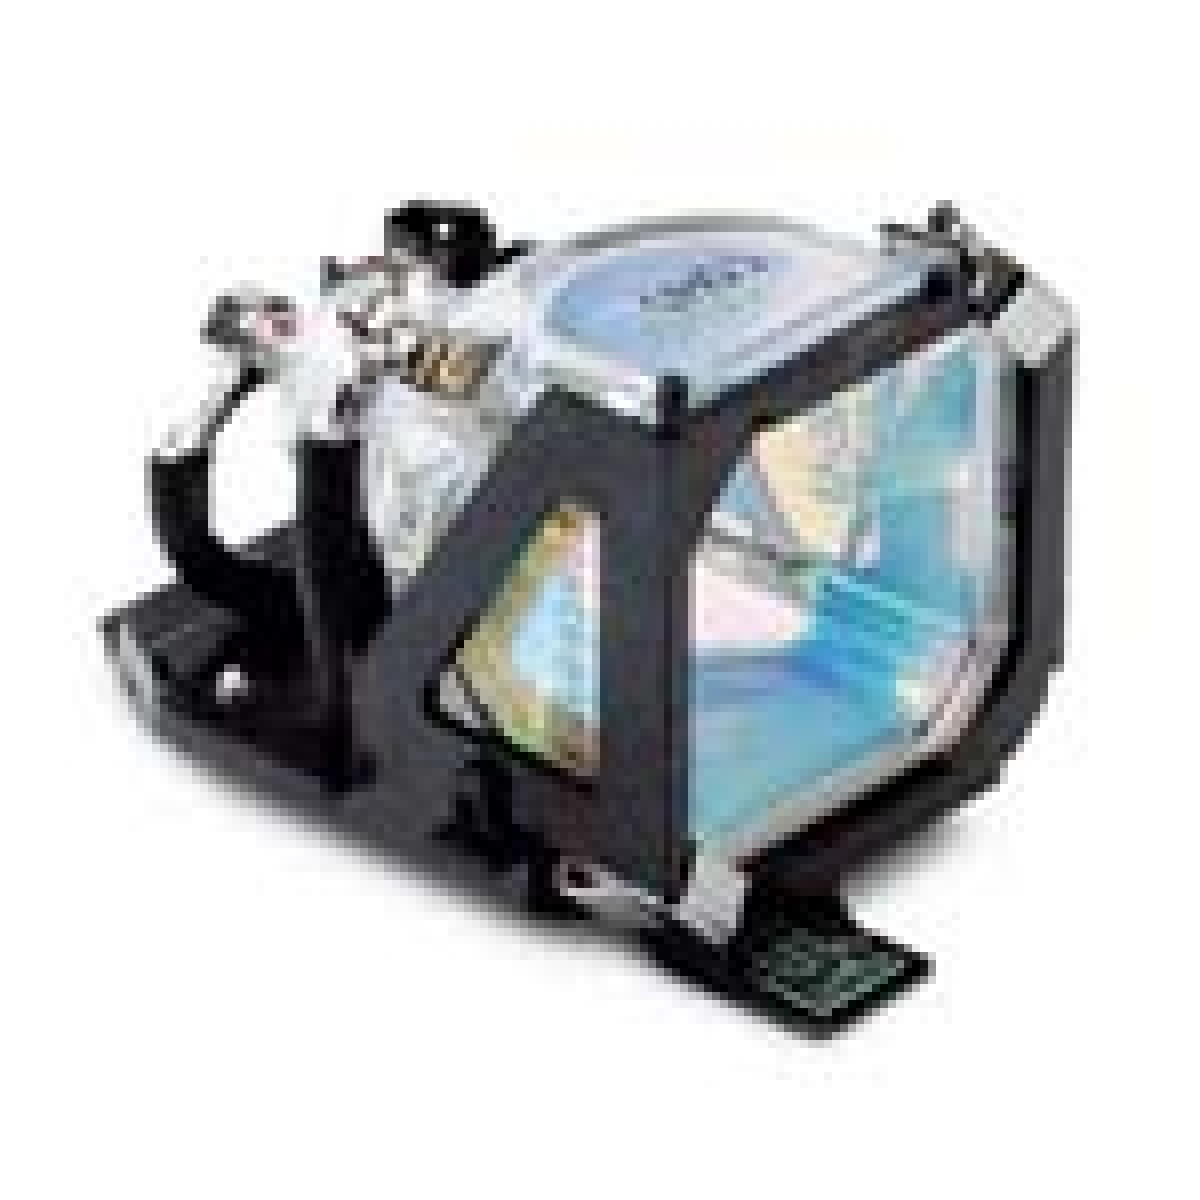 Plus Generic Complete PLUS PIANO HE3100 Projector Lamp projector. Includes 1 year warranty.